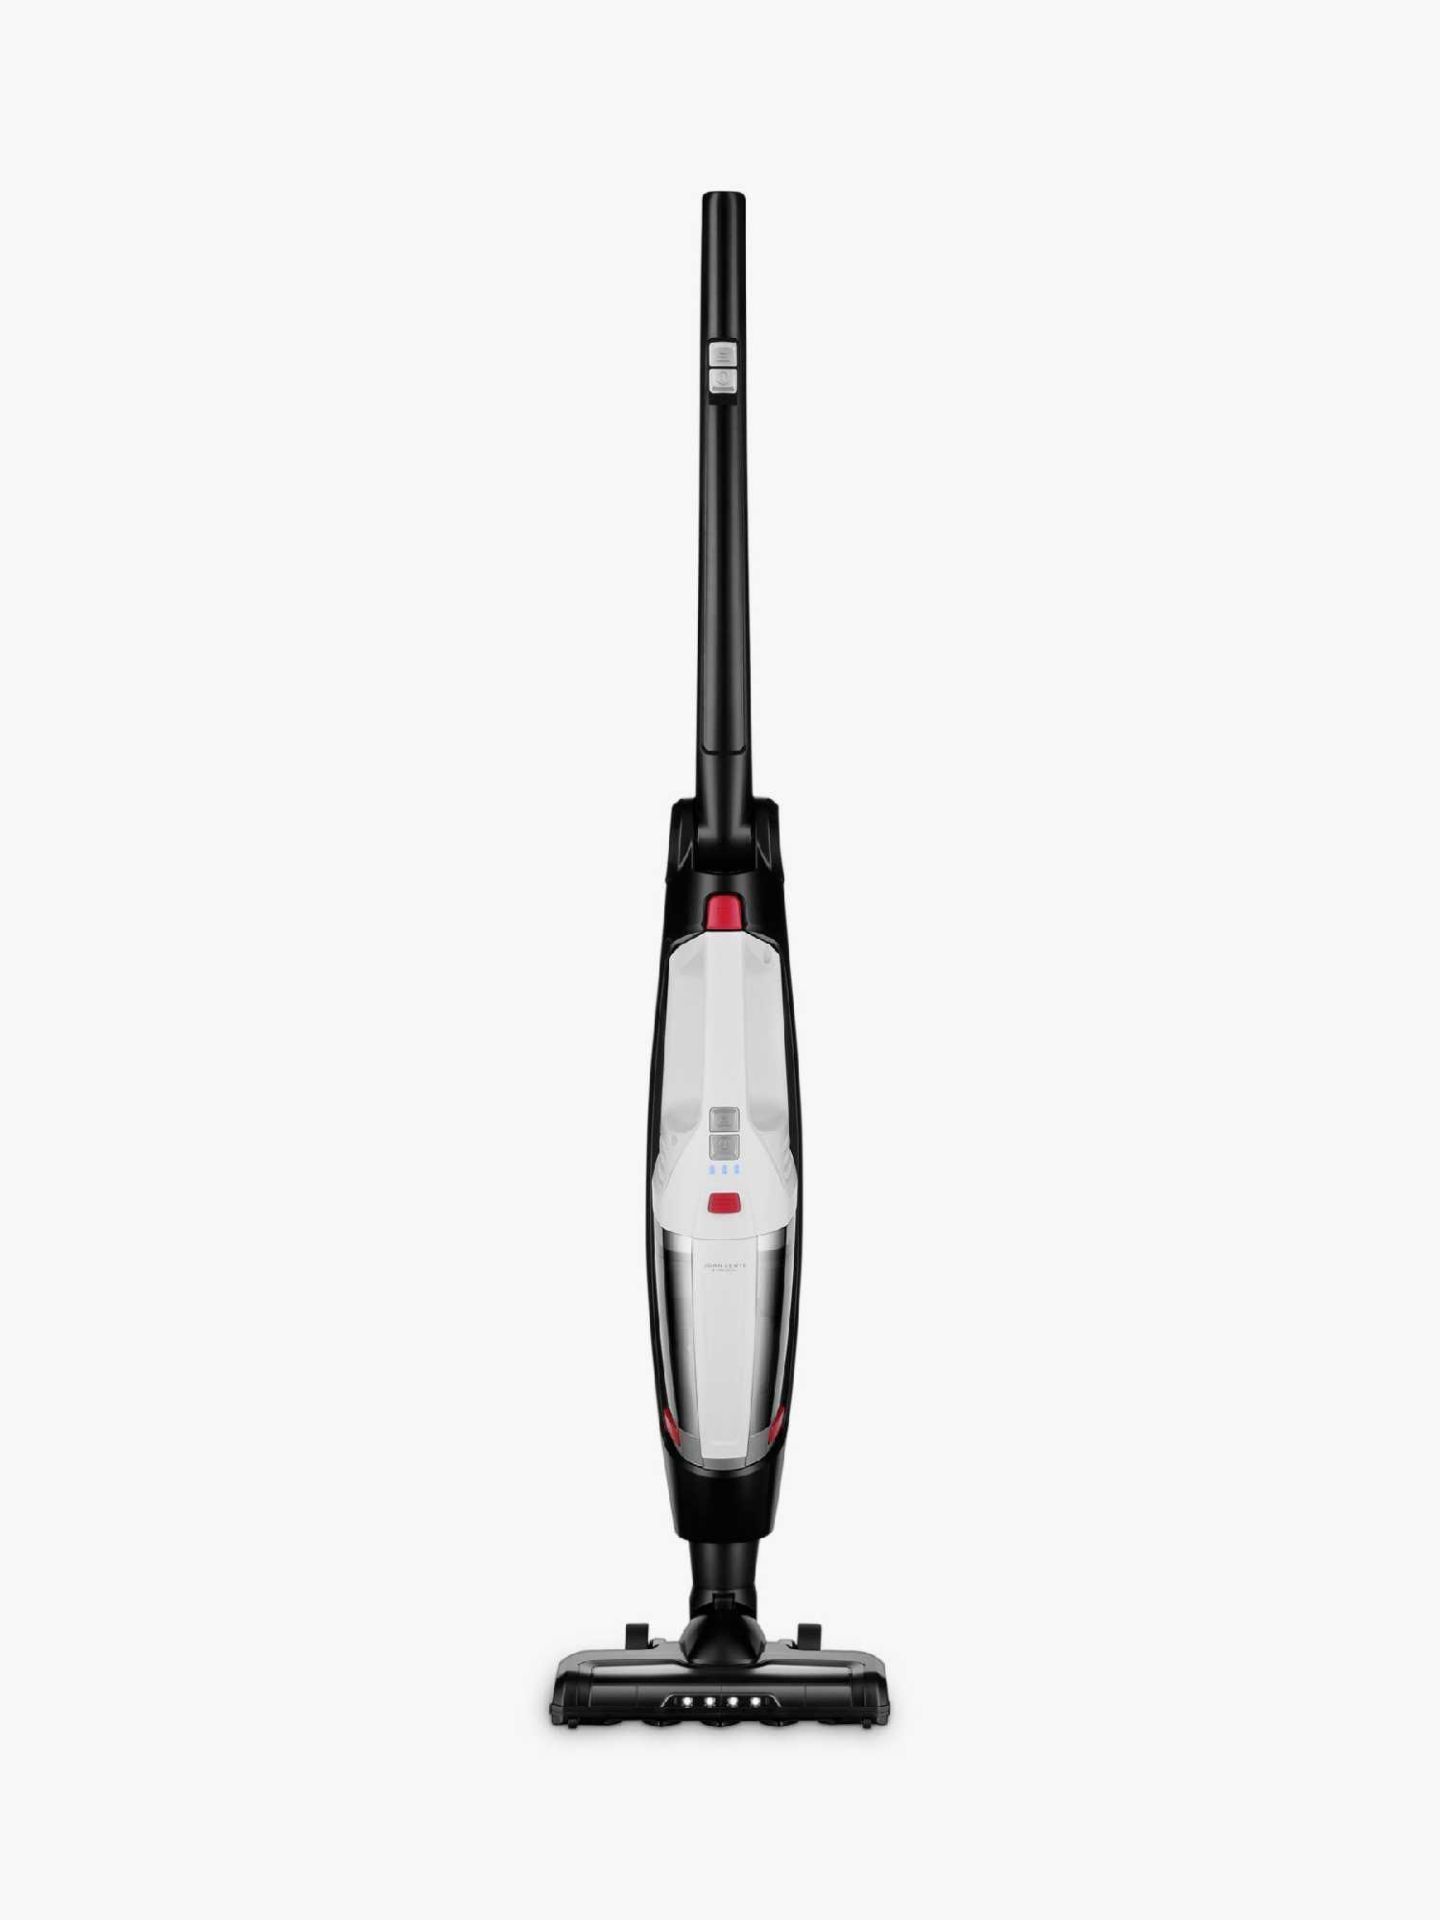 RRP £90 Each Unboxed Assorted John Lewis Vacuum Cleaners To Include Corded Vacuum Cleaners And Cord - Image 2 of 2